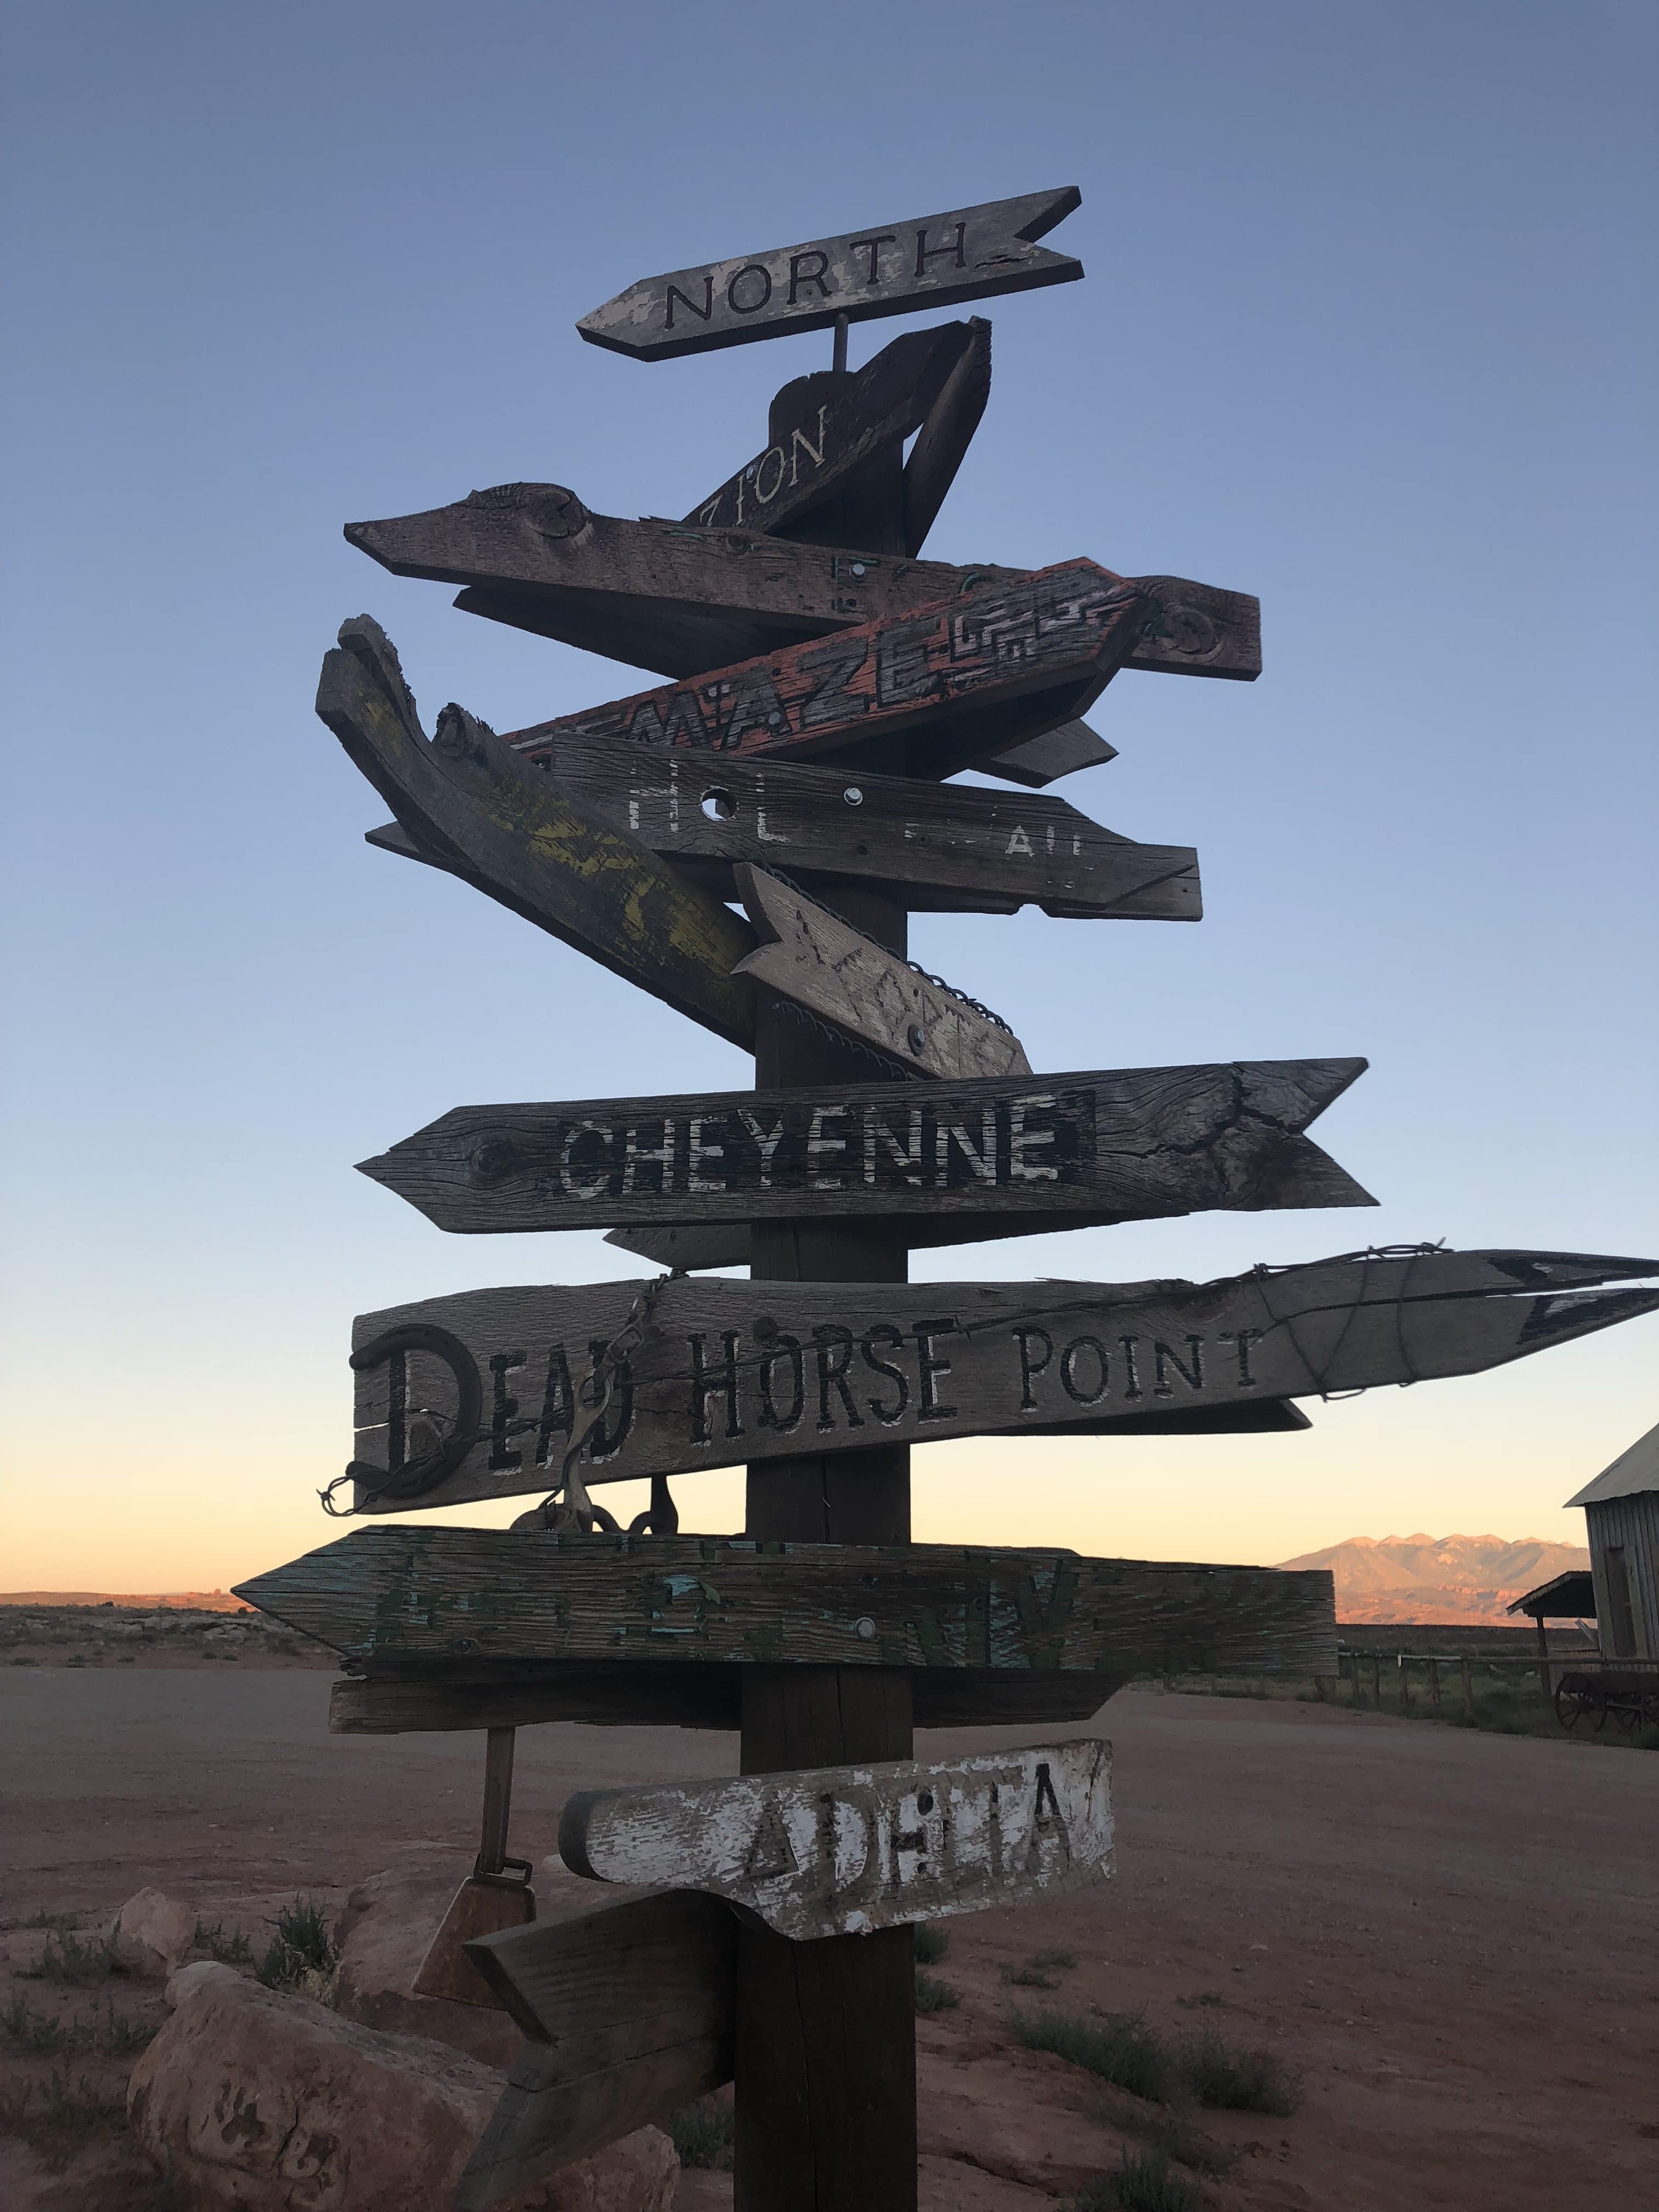 Signs pointing in different directions in a desert